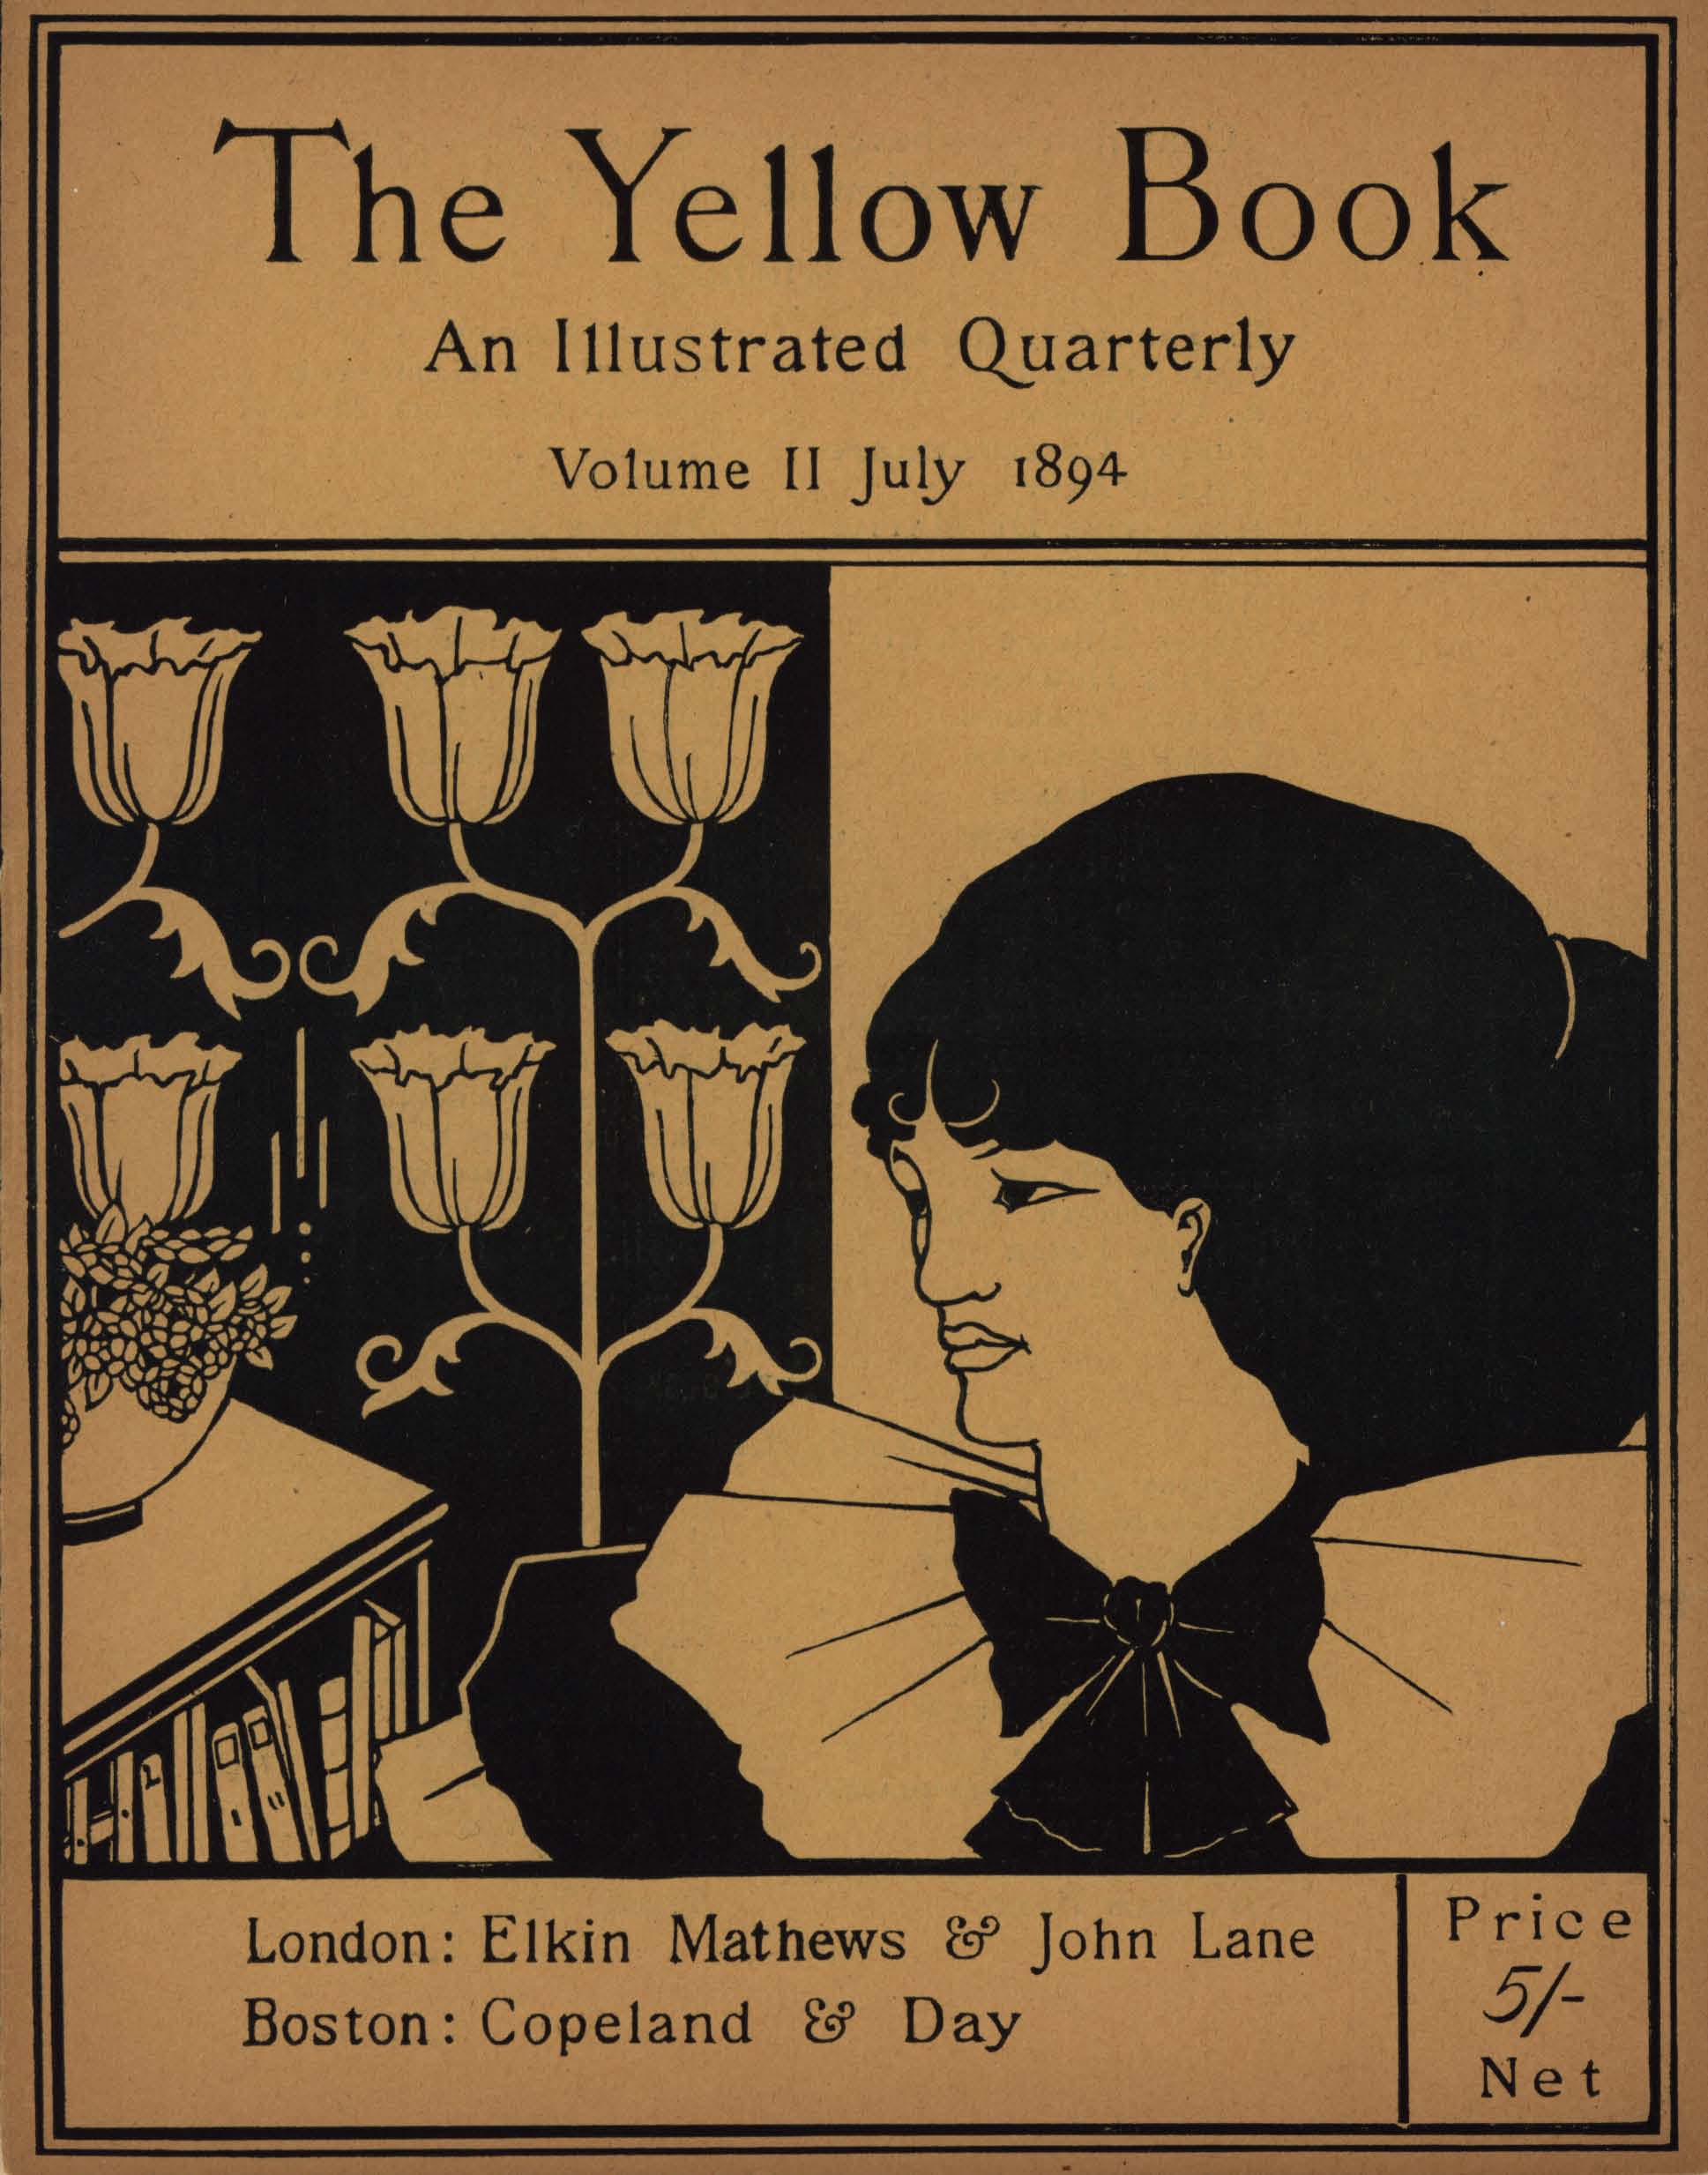 The image is divided in half vertically the left side is black and the right side is uncoloured The left side of the image contains a bookcase with a potted plant on top Behind and above the bookcase is a flowering candelabra design On the right side of the image is a woman s head in 3 4 position looking left her shoulders are covered in three ruffled collars tied with a large black bow The image is printed black on yellow paper and vertically displayed